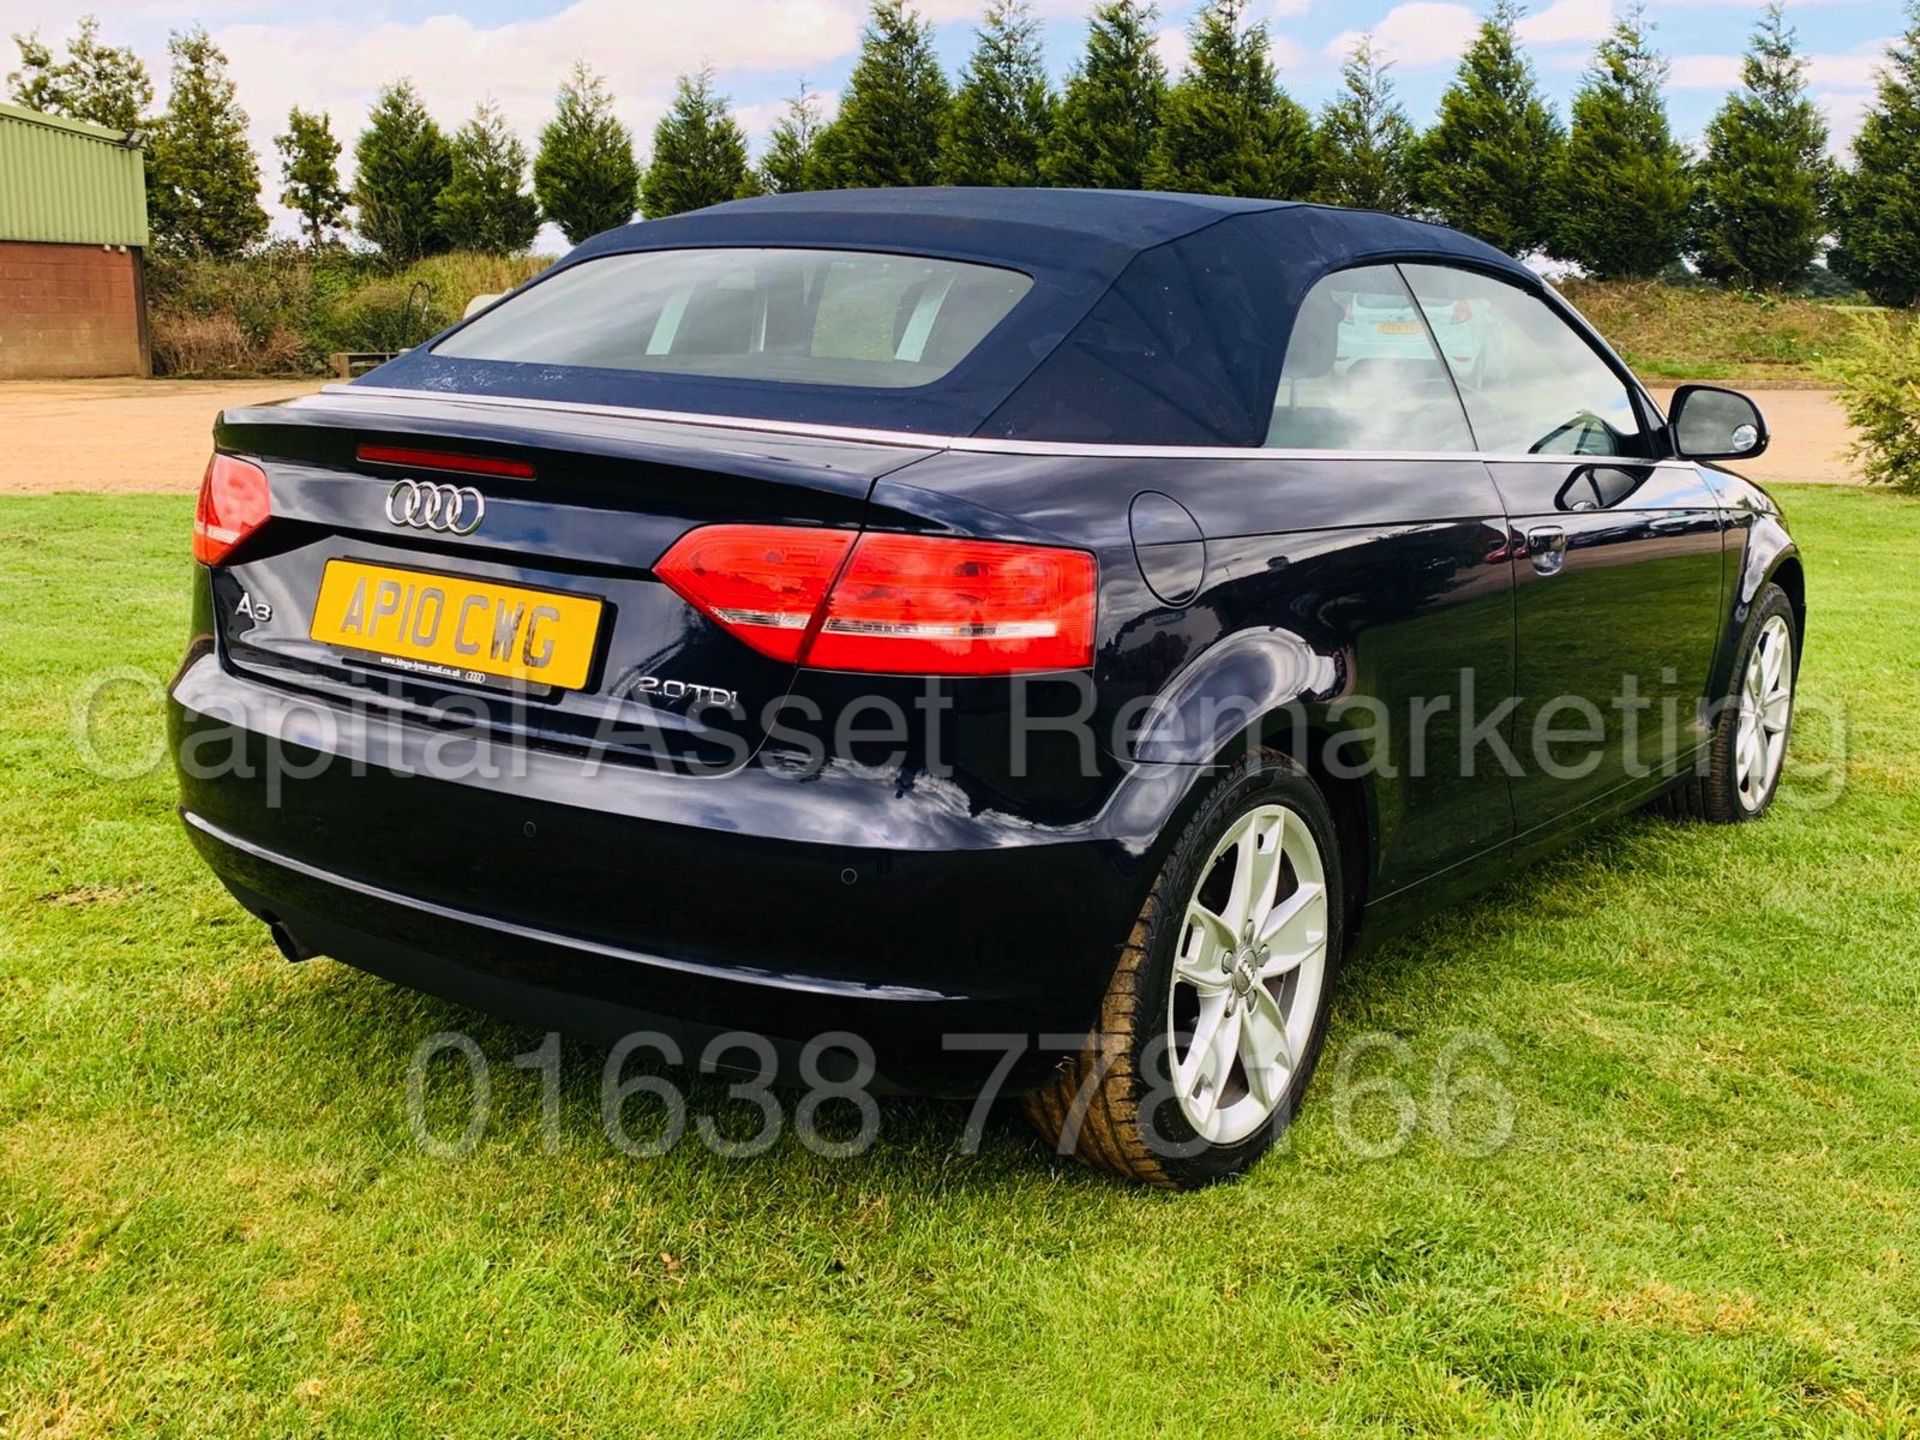 (On Sale) AUDI A3 *CONVERTIBLE / CABRIOLET* SPORT EDITION (2010) '2.0 TDI - 140 BHP - 6 SPEED' - Image 19 of 47